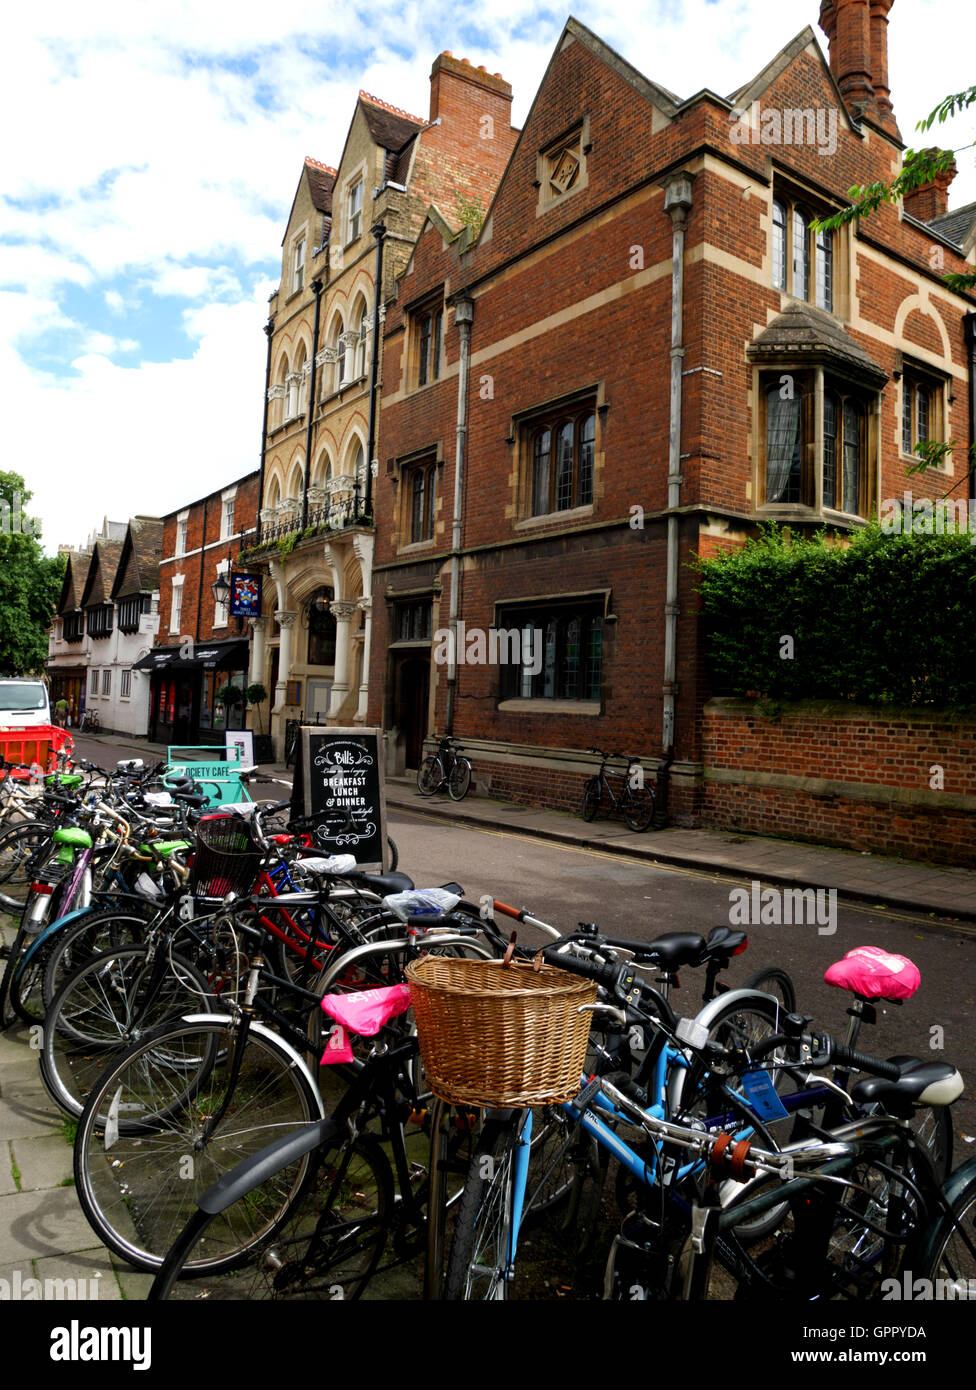 Bicycles parked in St Michael's Street, Oxford. Stock Photo